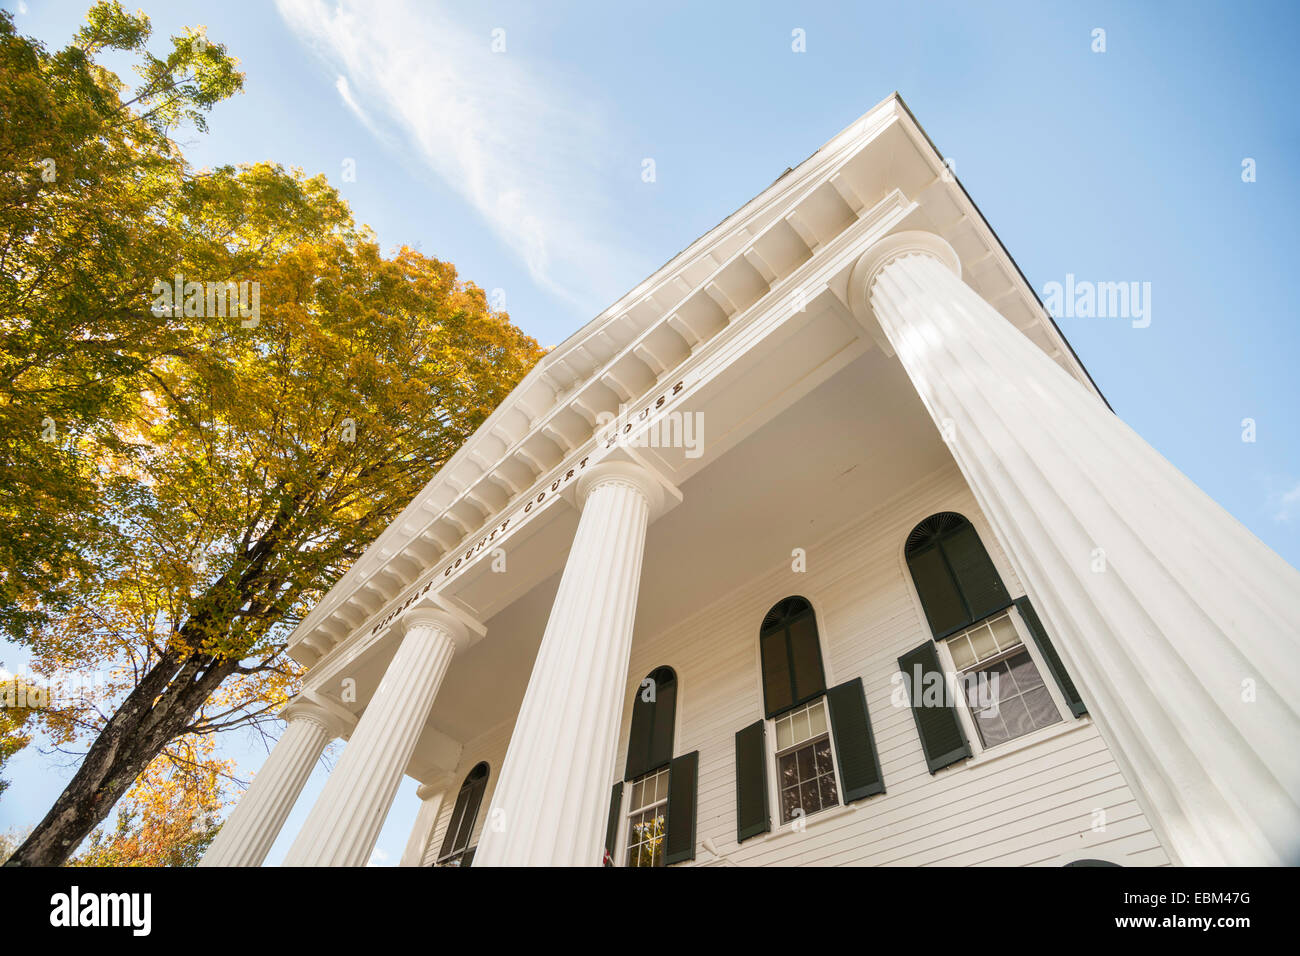 Greek Revival architectural example, town courthouse, Newfane, Vermont, USA. Stock Photo